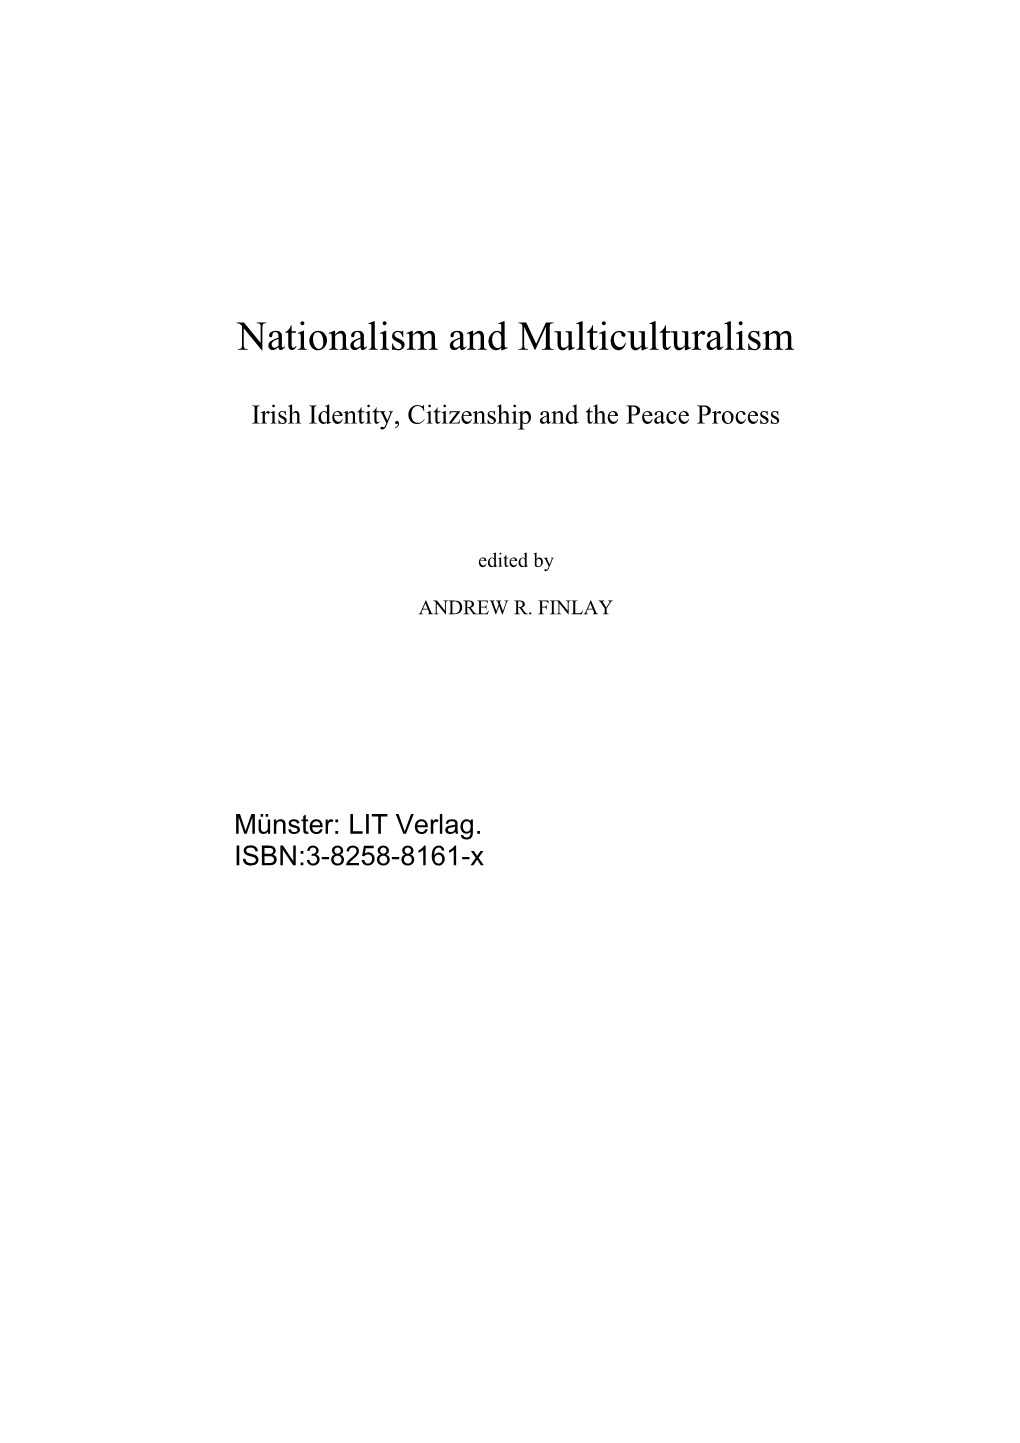 Nationalism and Multiculturalism